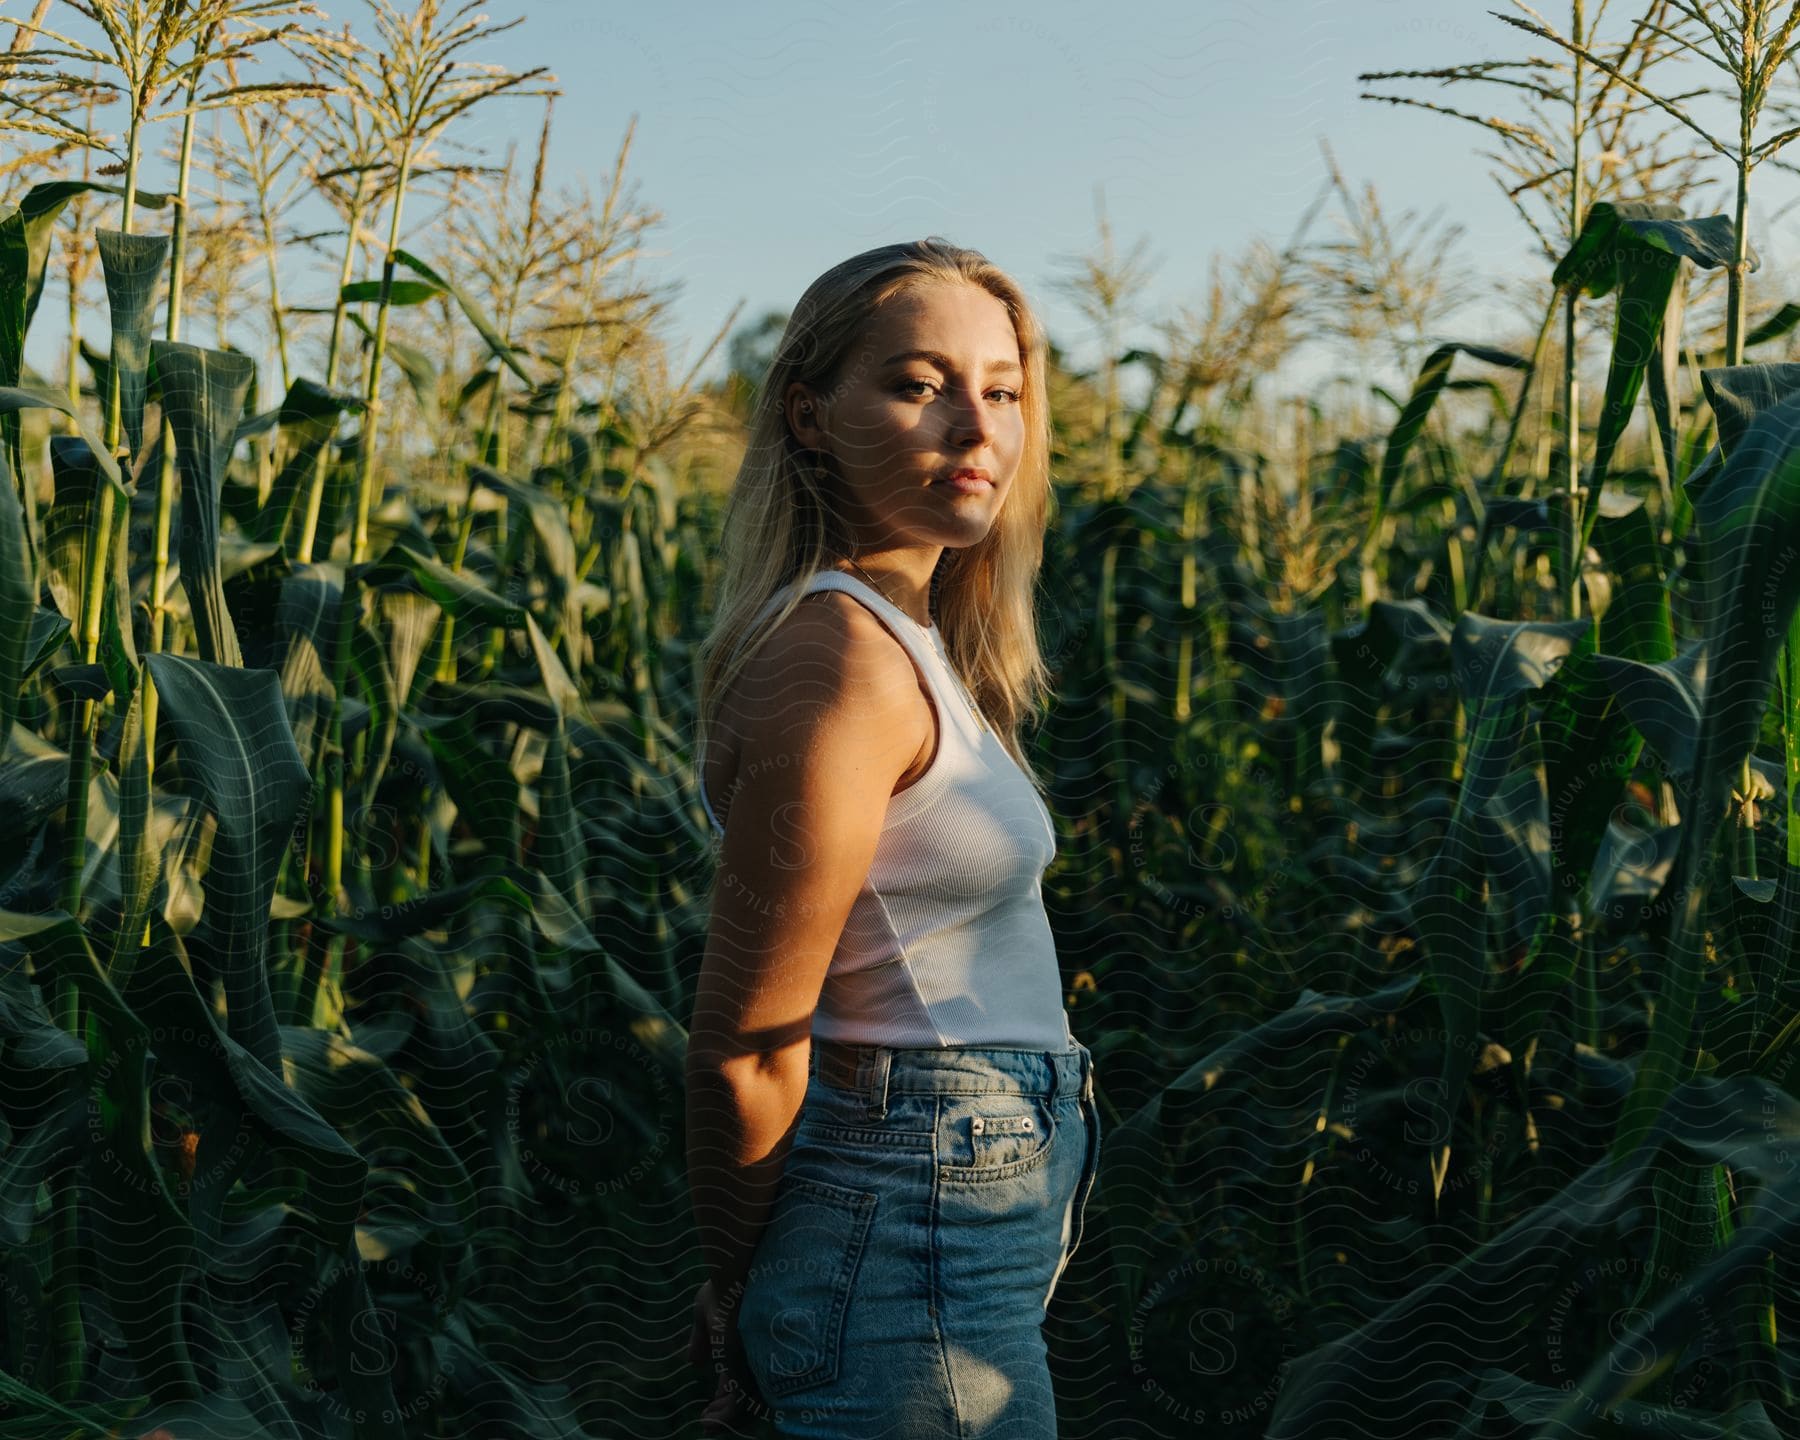 A person with blonde hair is smiling in a field